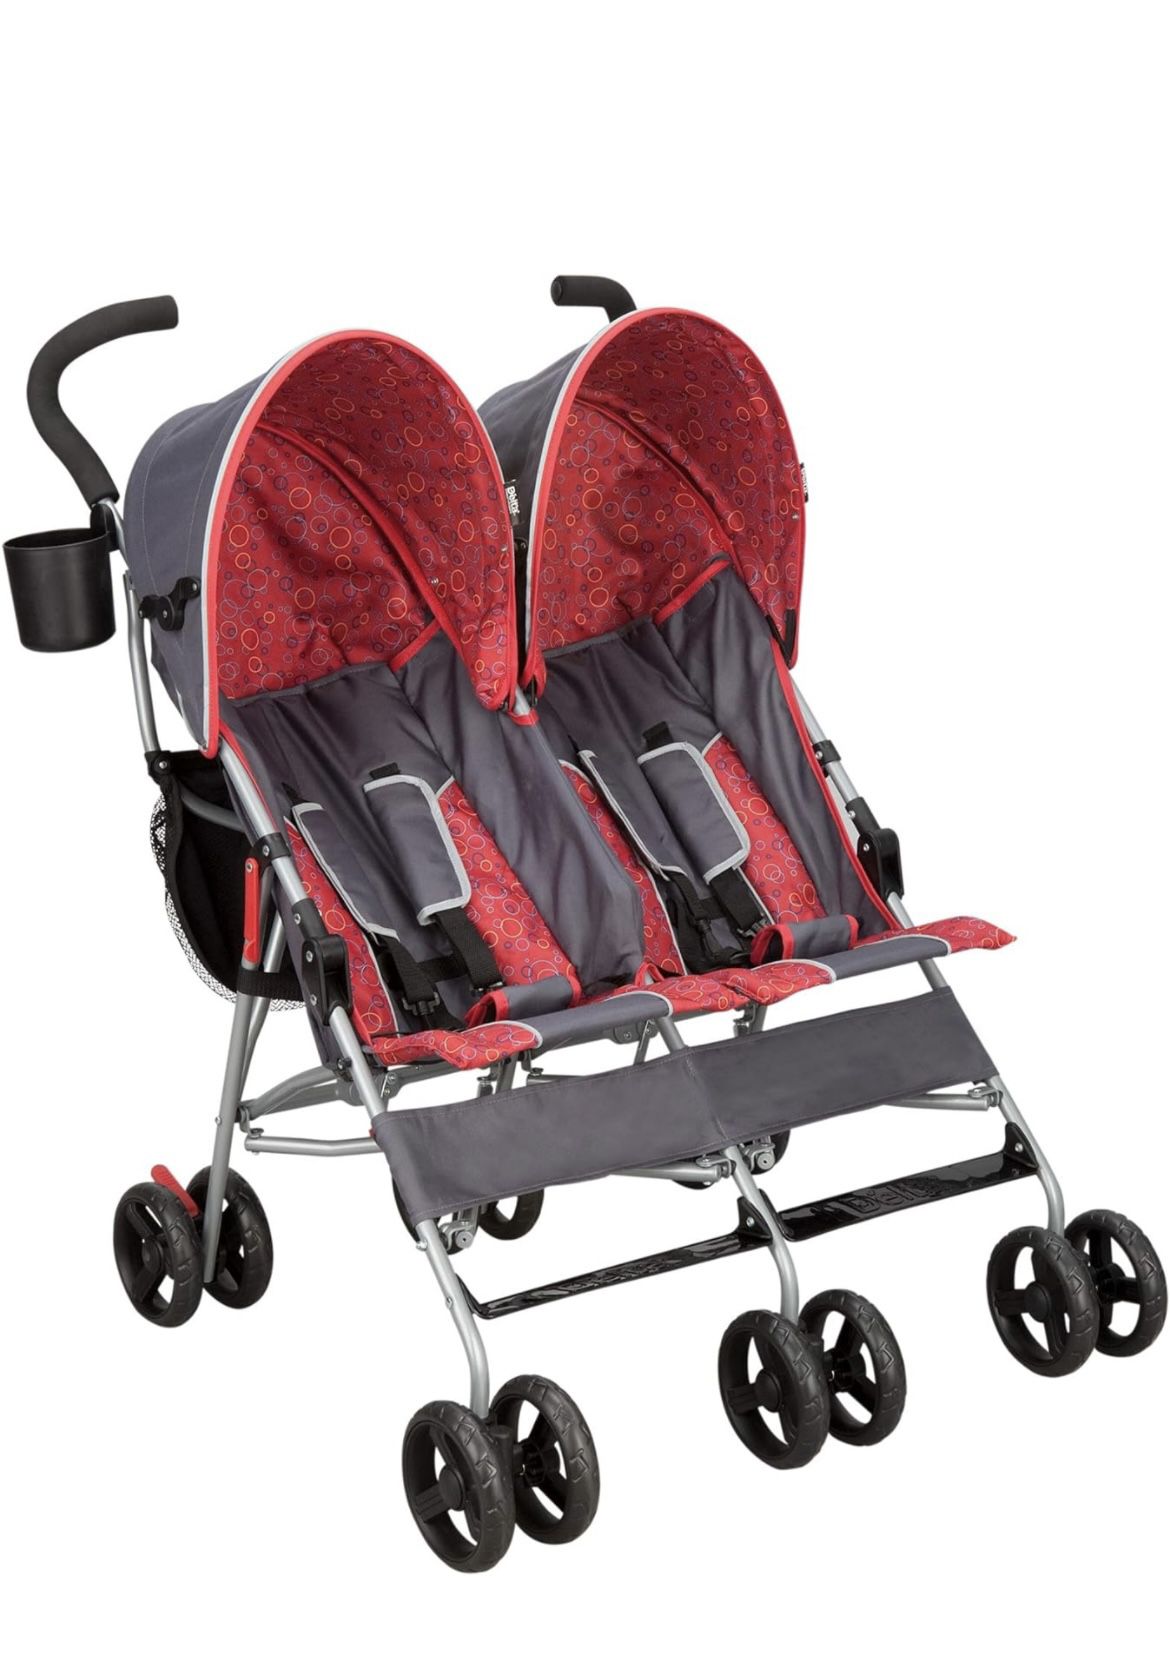 Delta Children LX Side by Side Stroller - with Recline, Storage & Compact Fold, Grey